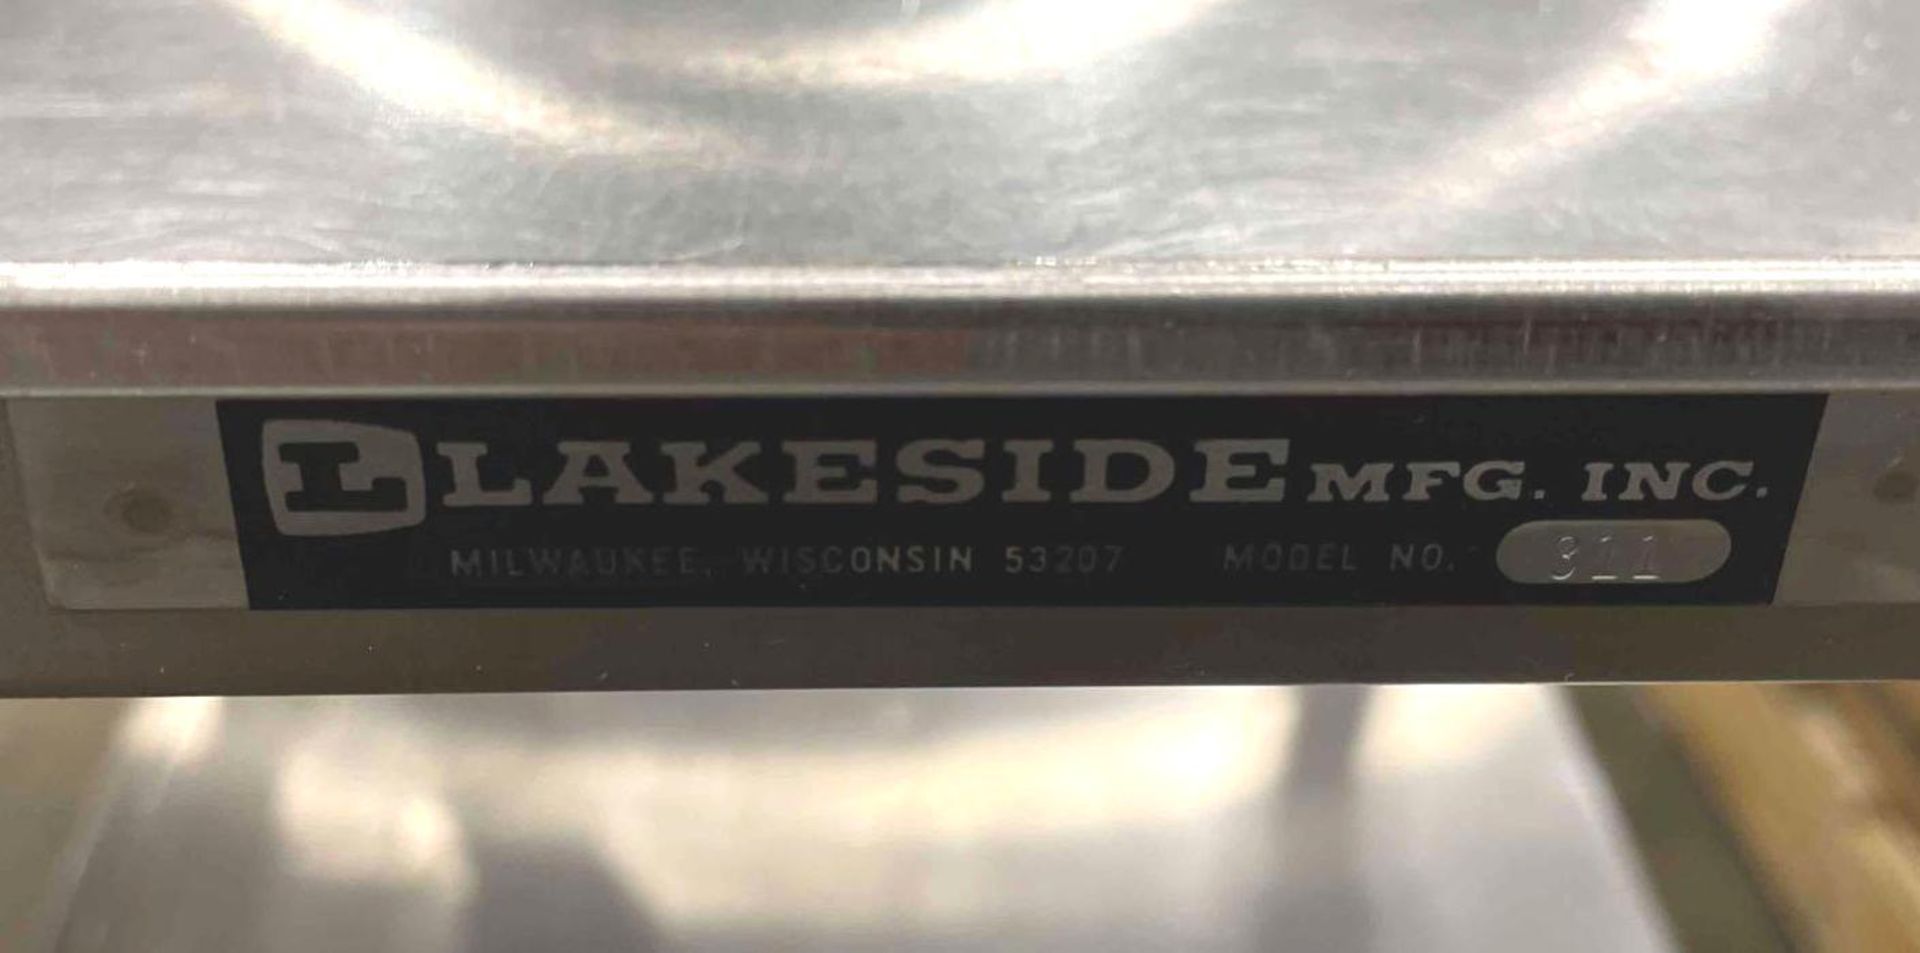 LAKESIDE 311 STAINLESS STEEL UTILITY CART 27" X 16" X 32" 300 LB CAPACITY - Image 3 of 4